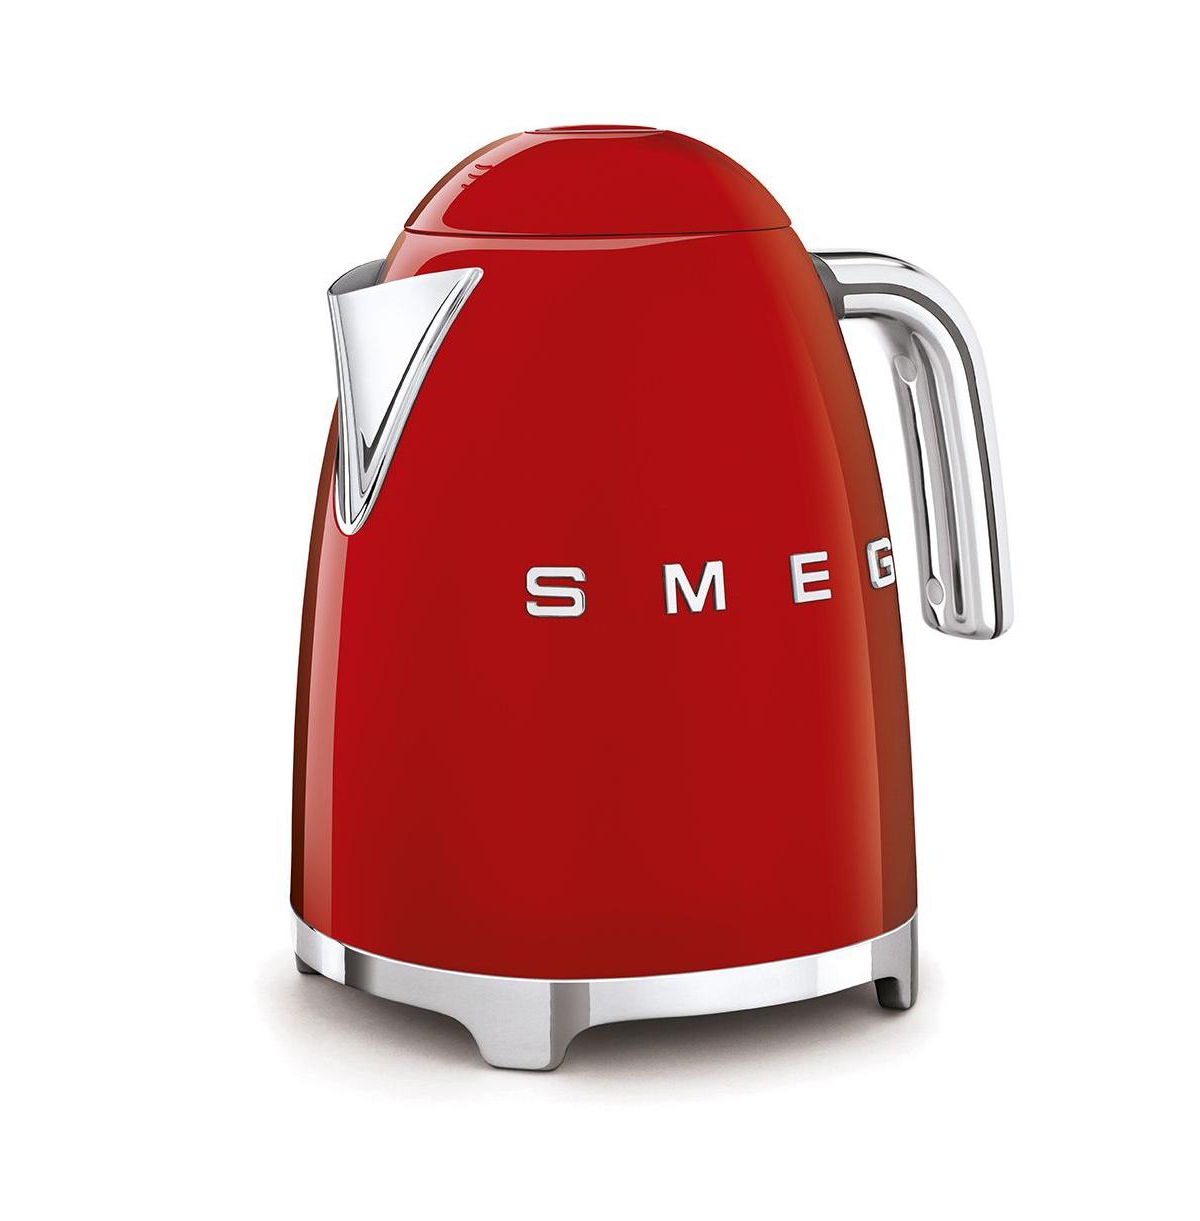 Smeg Electric Kettle In Red